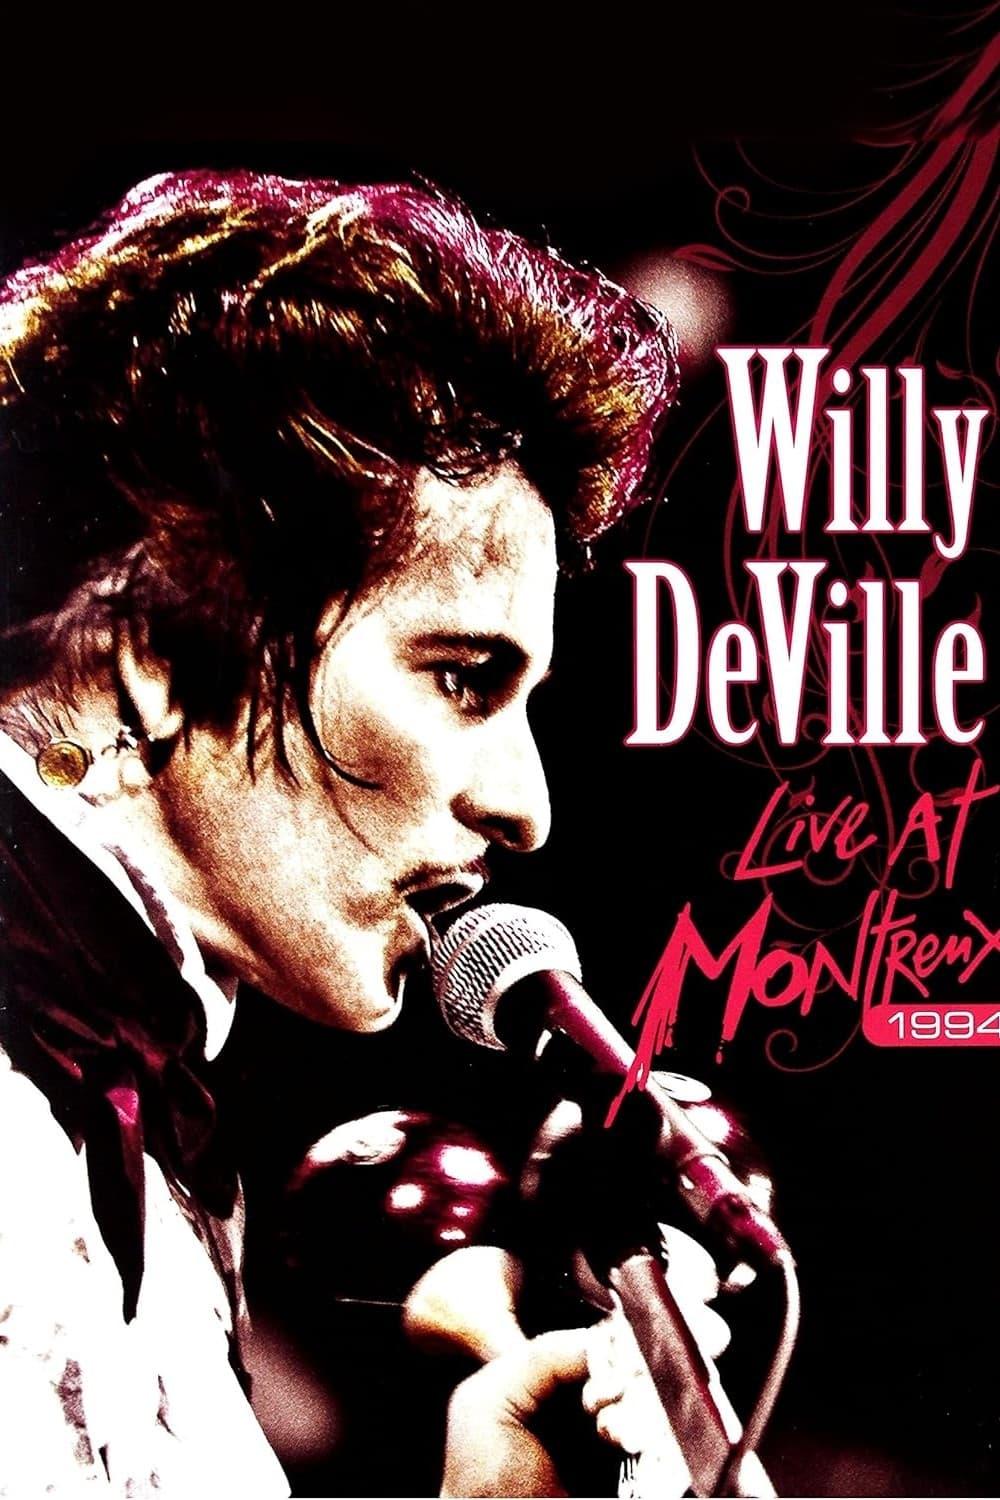 Willy DeVille - Live At Montreux 1994 poster